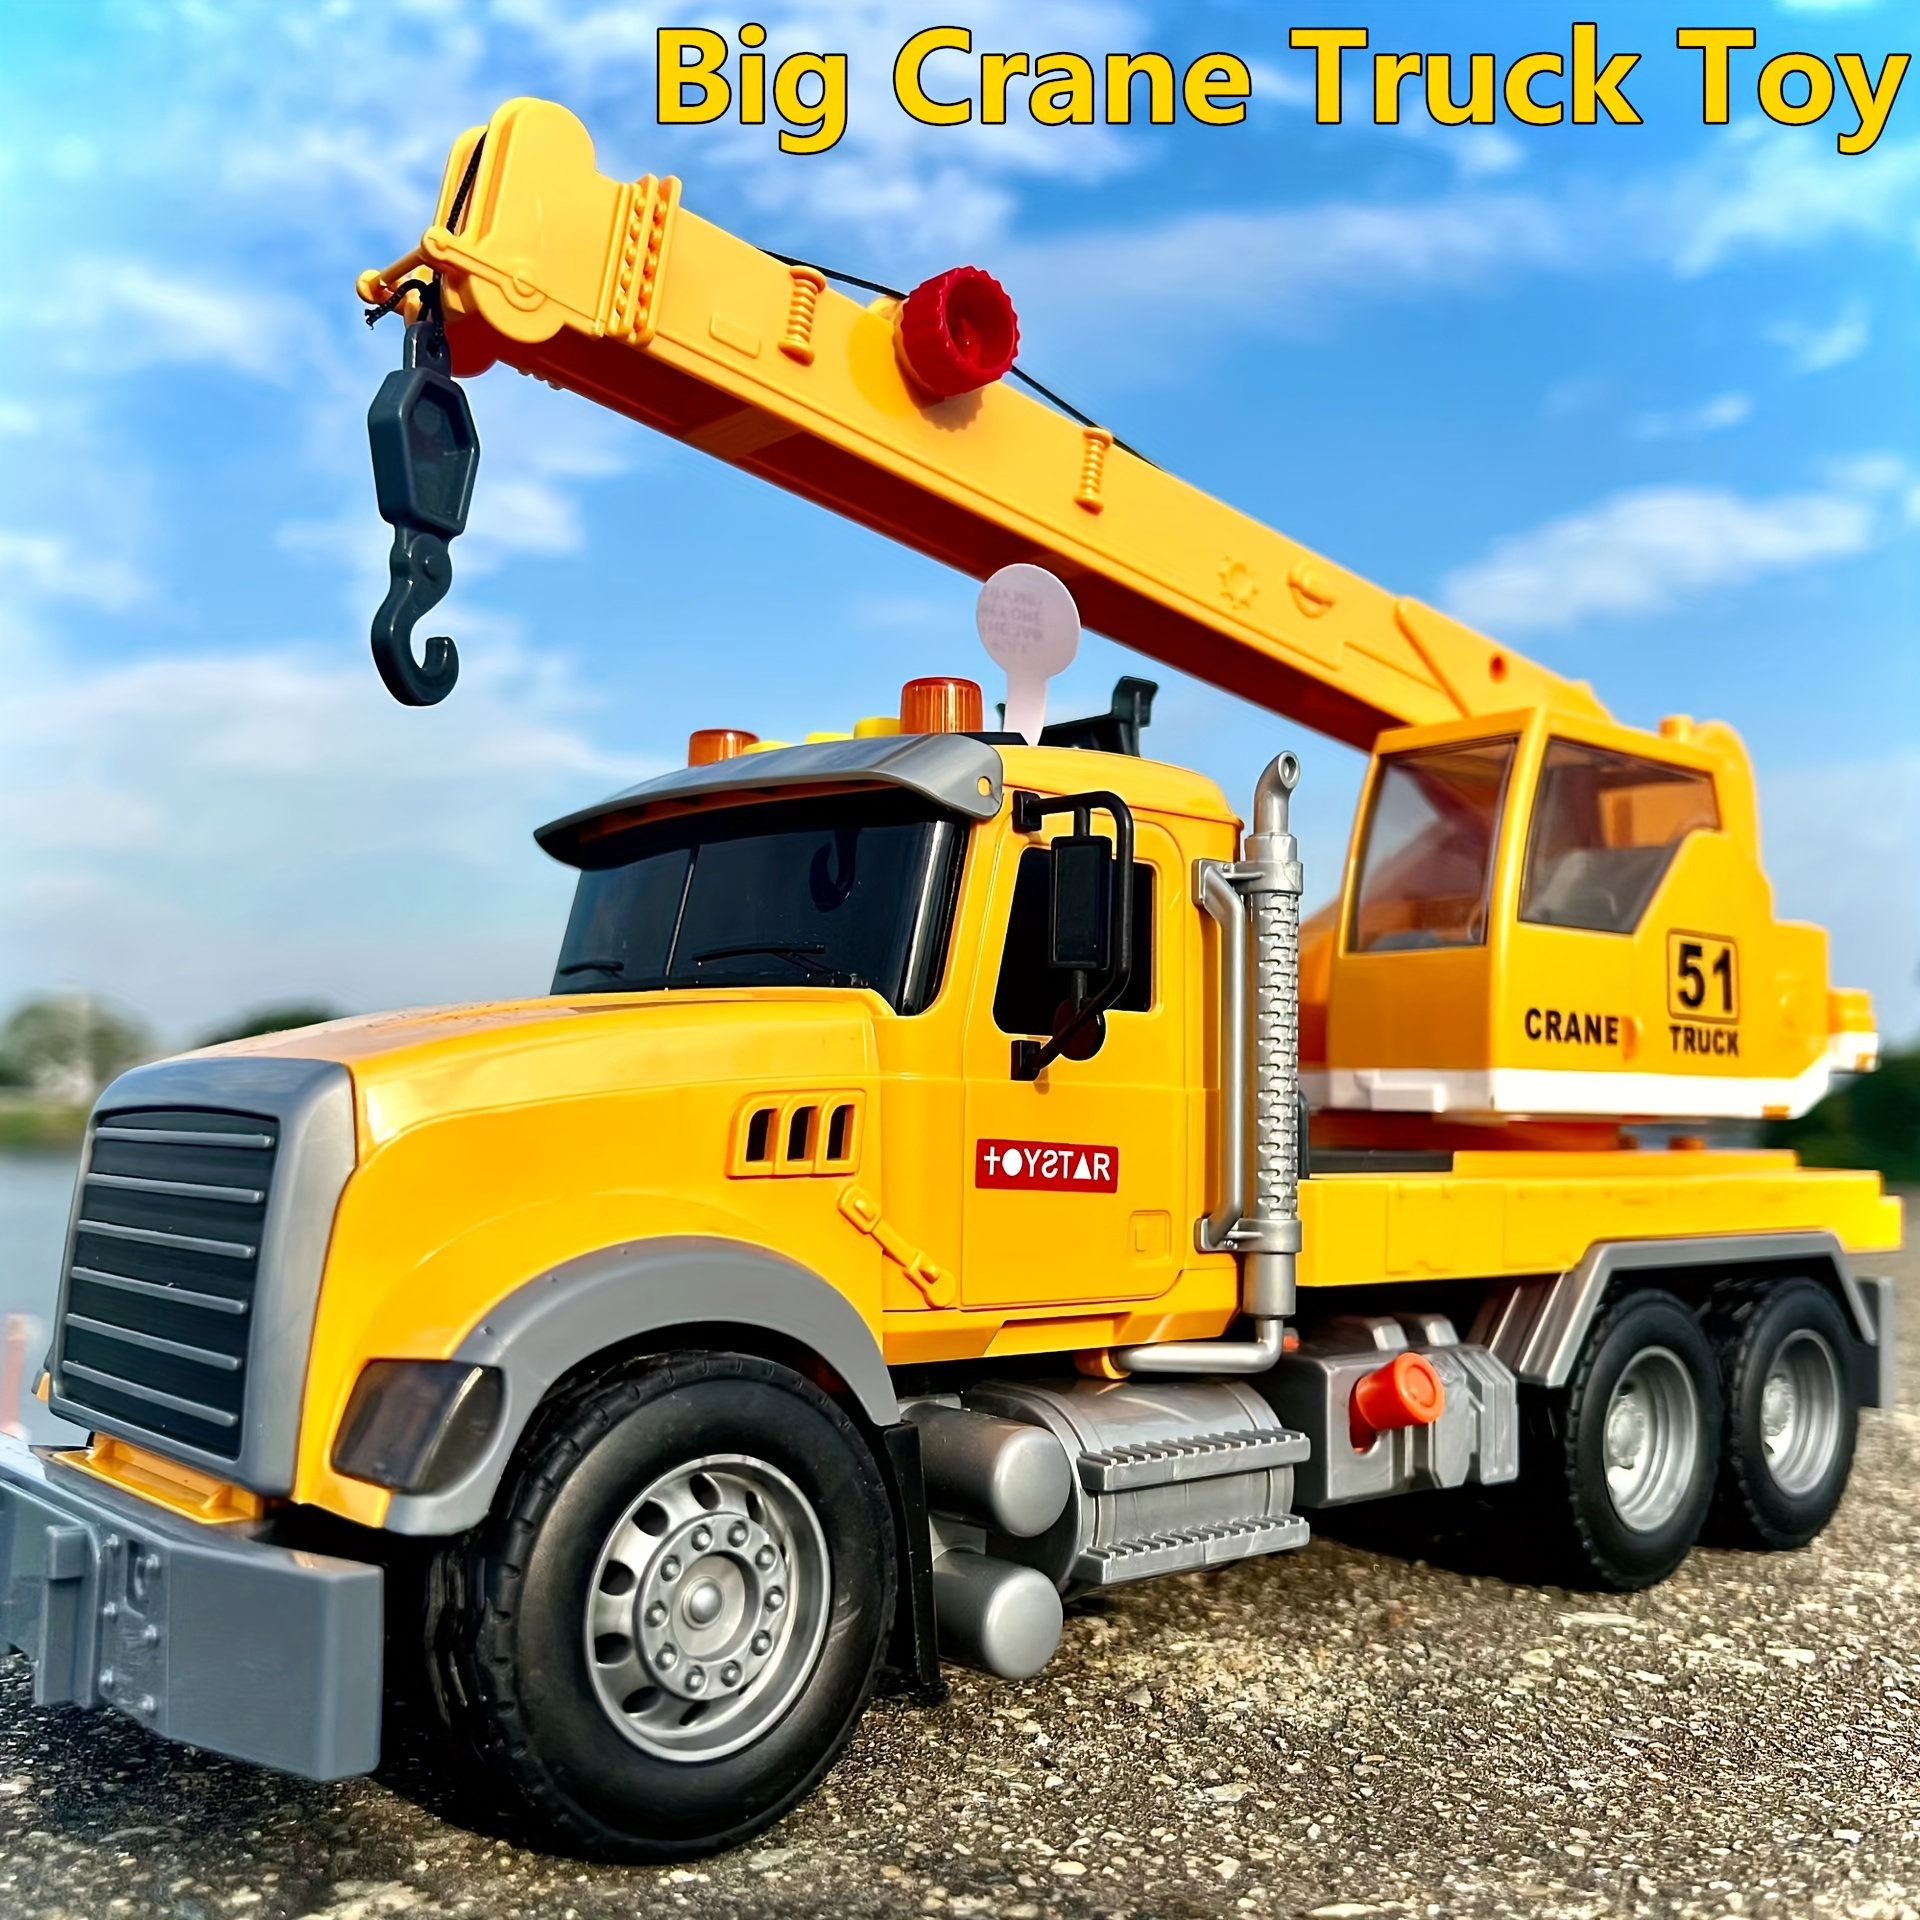 N2K2 ENTERPRISE Unbreakable Friction Power Crane Toy With Cable 360 Degree Rotating Towing Pull Back Vehicles Construction Truck Toy For 3+ Years